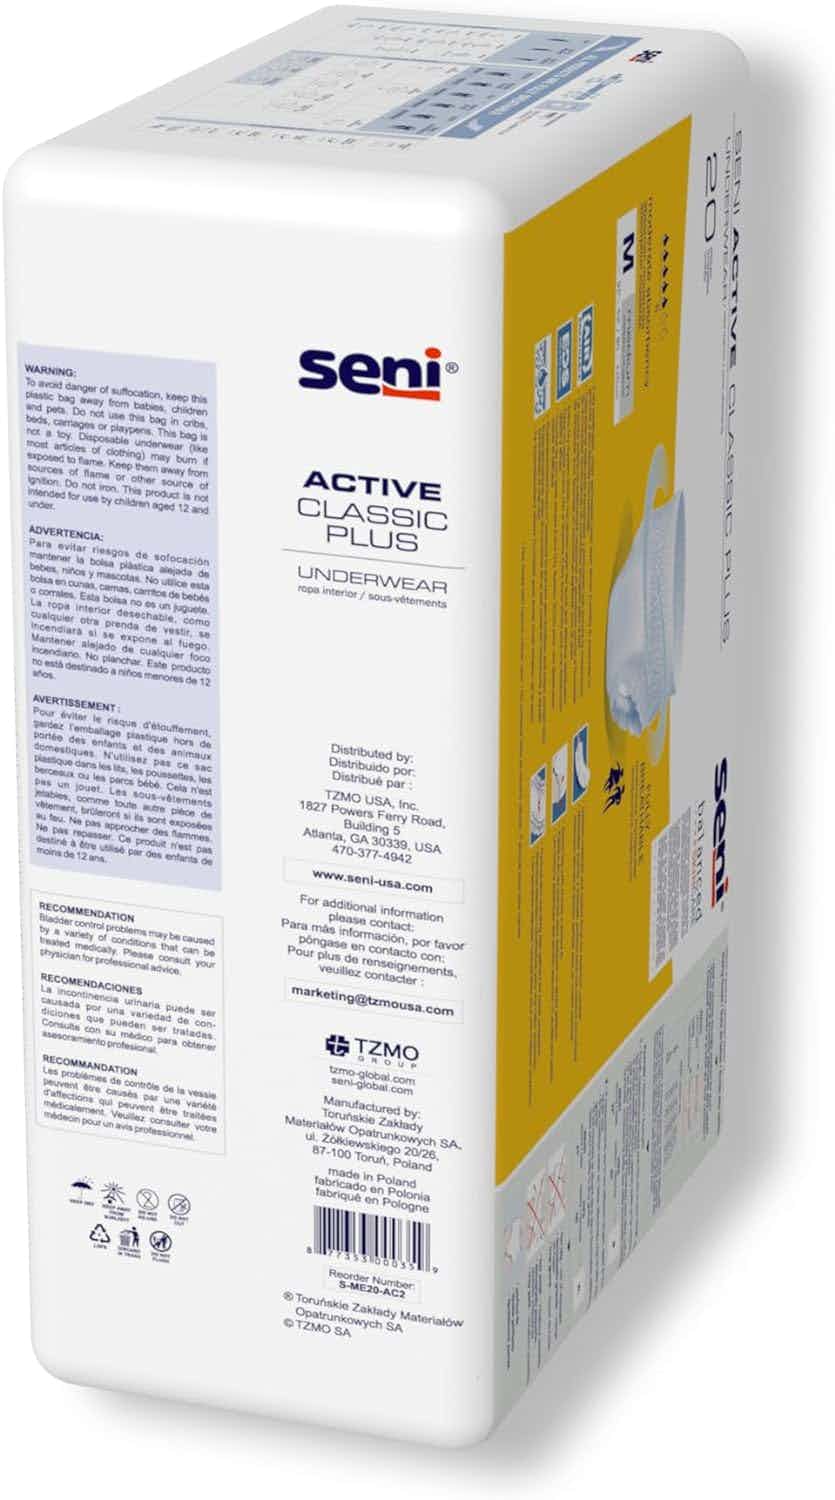 Seni Active Classic Plus Pull-up Underwear, Moderate Absorbency